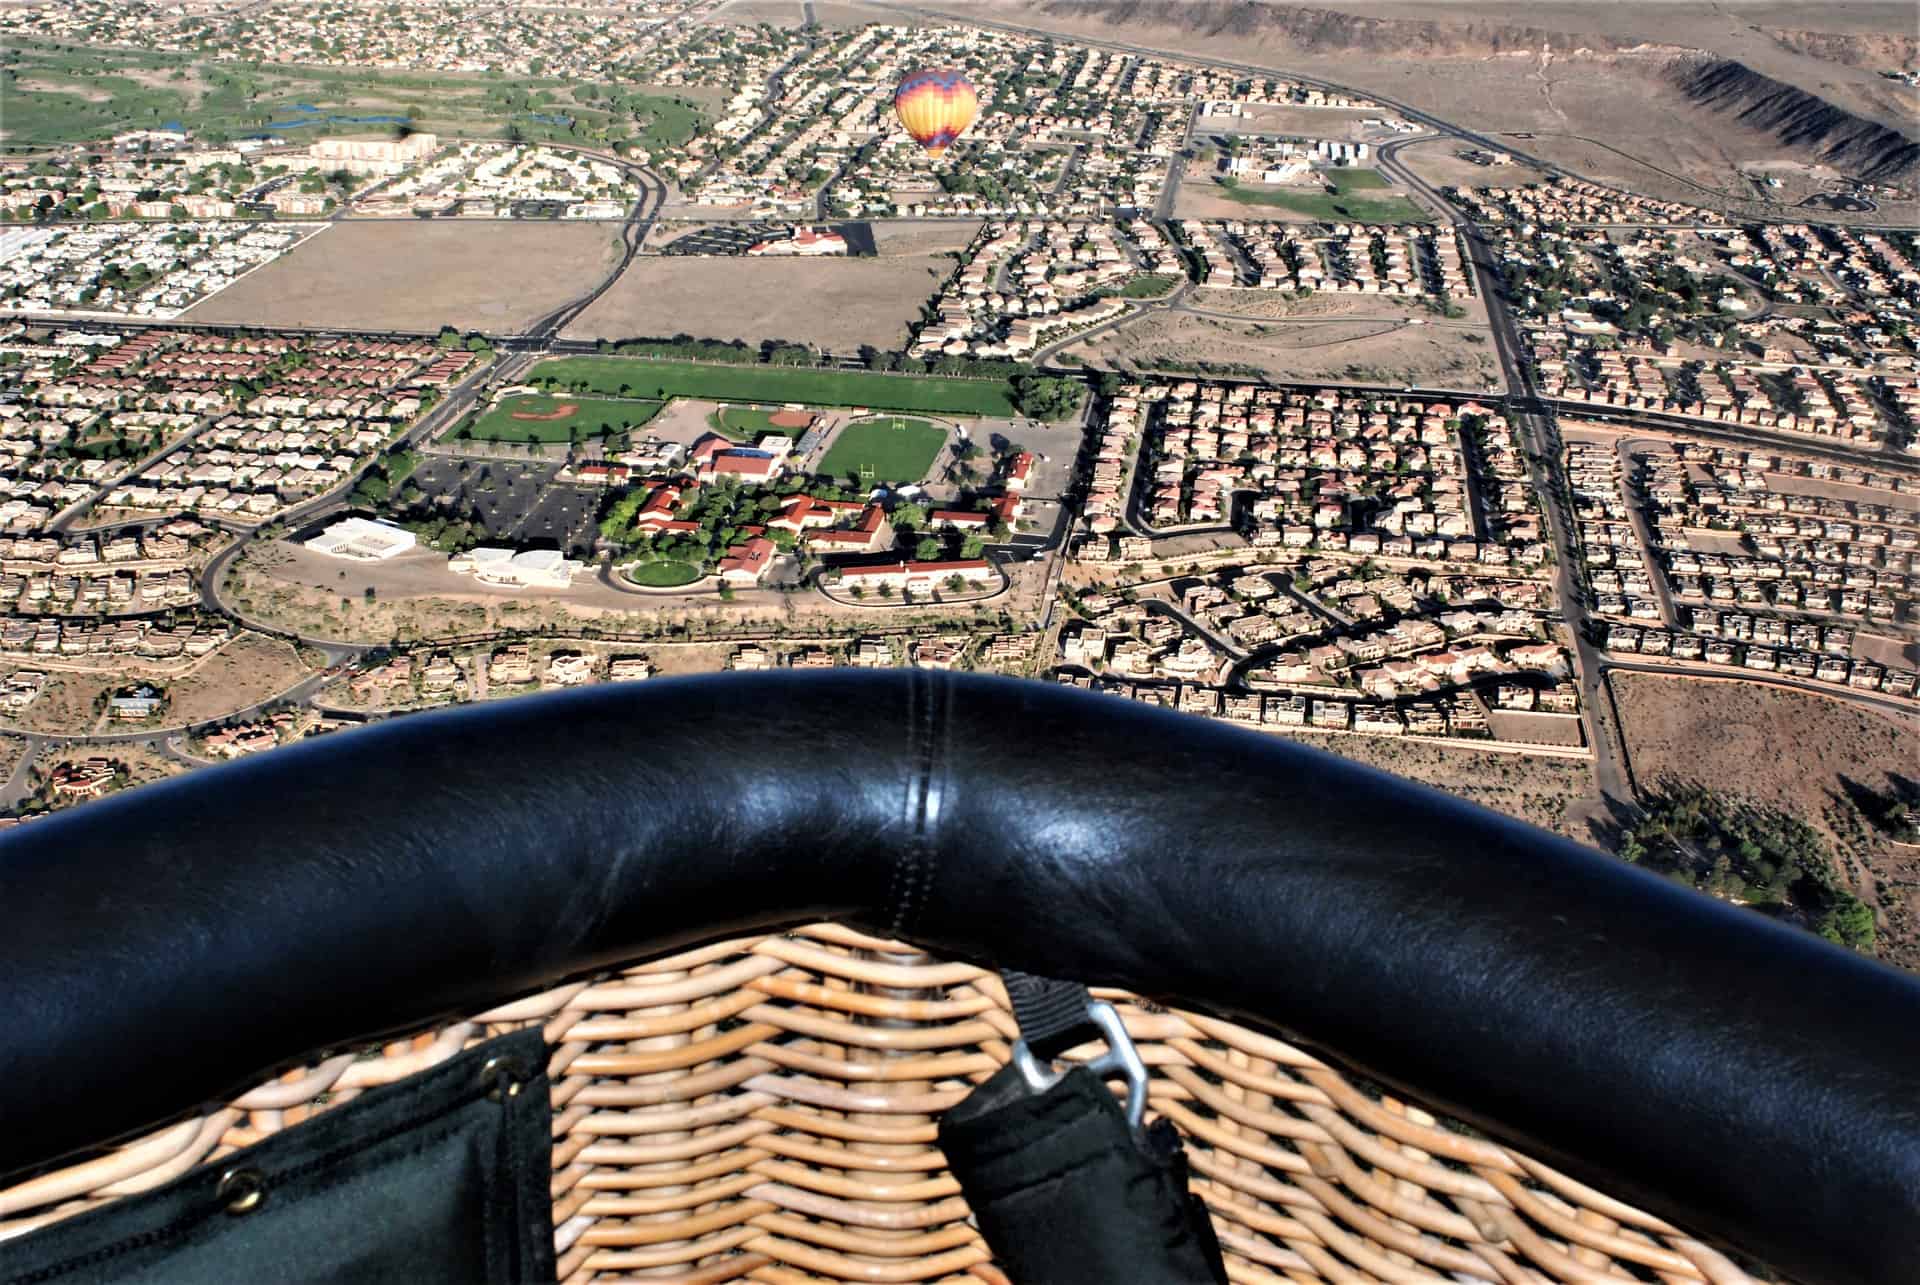 Best things to do in Albuquerque New Mexico Ashley Biggers view from hot air balloon Enlightening Images from Pixabay